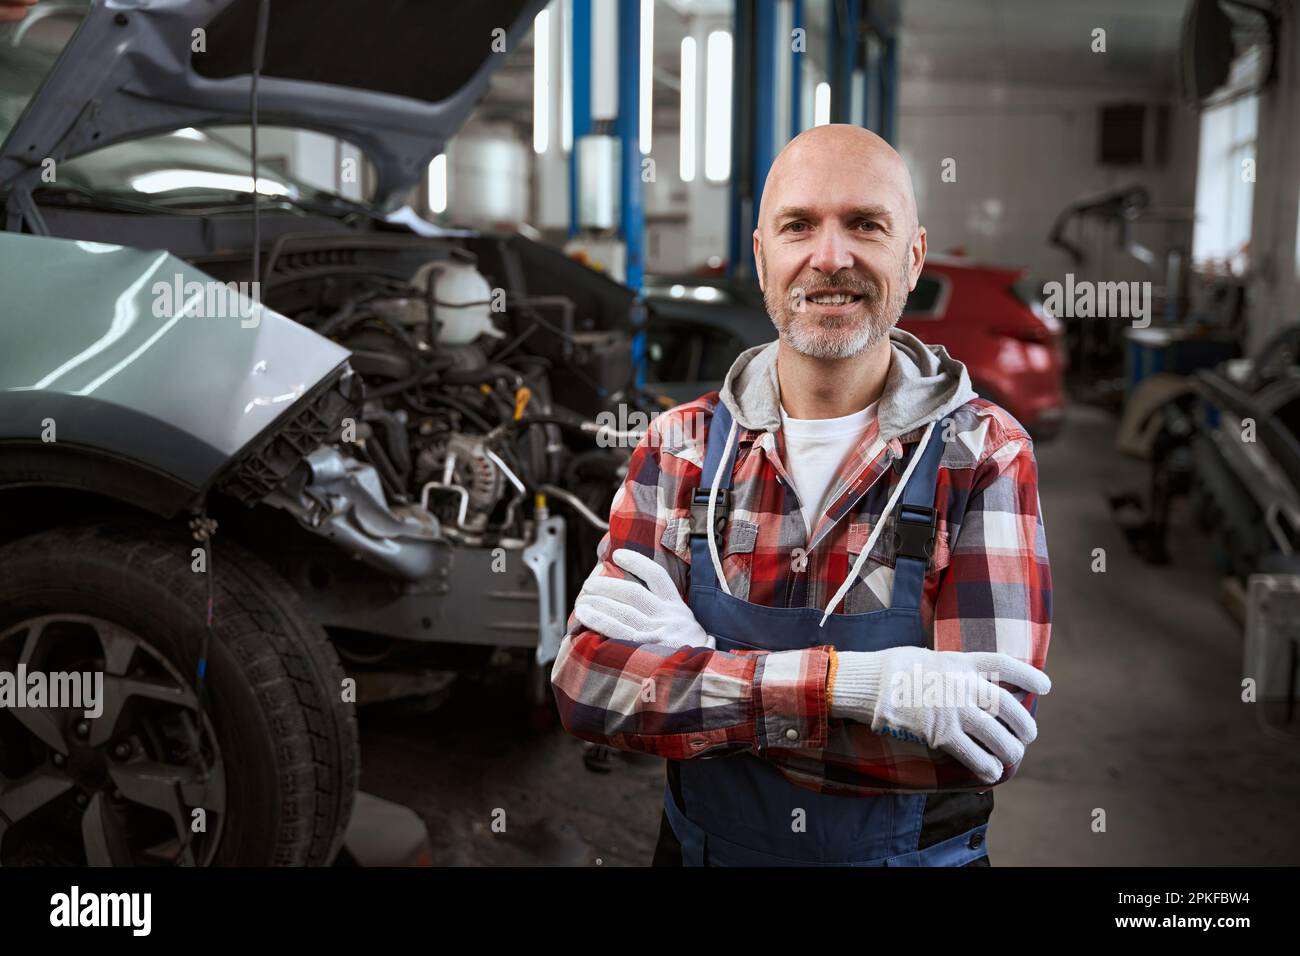 Smiling auto repairman stands at his workplace against background of cars Stock Photo